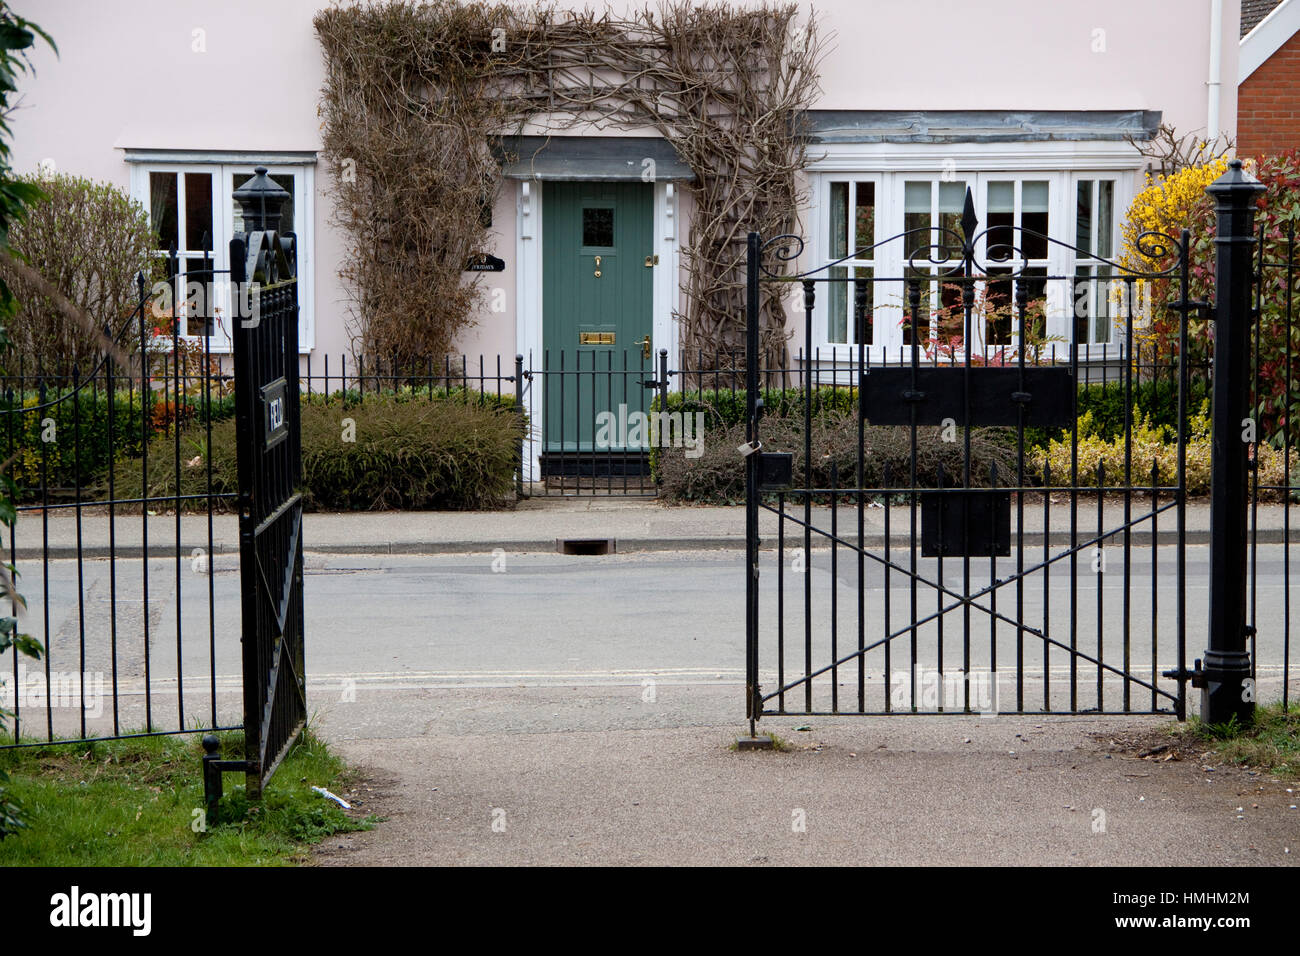 House with climber round the door seen through black metal park gates Stock Photo